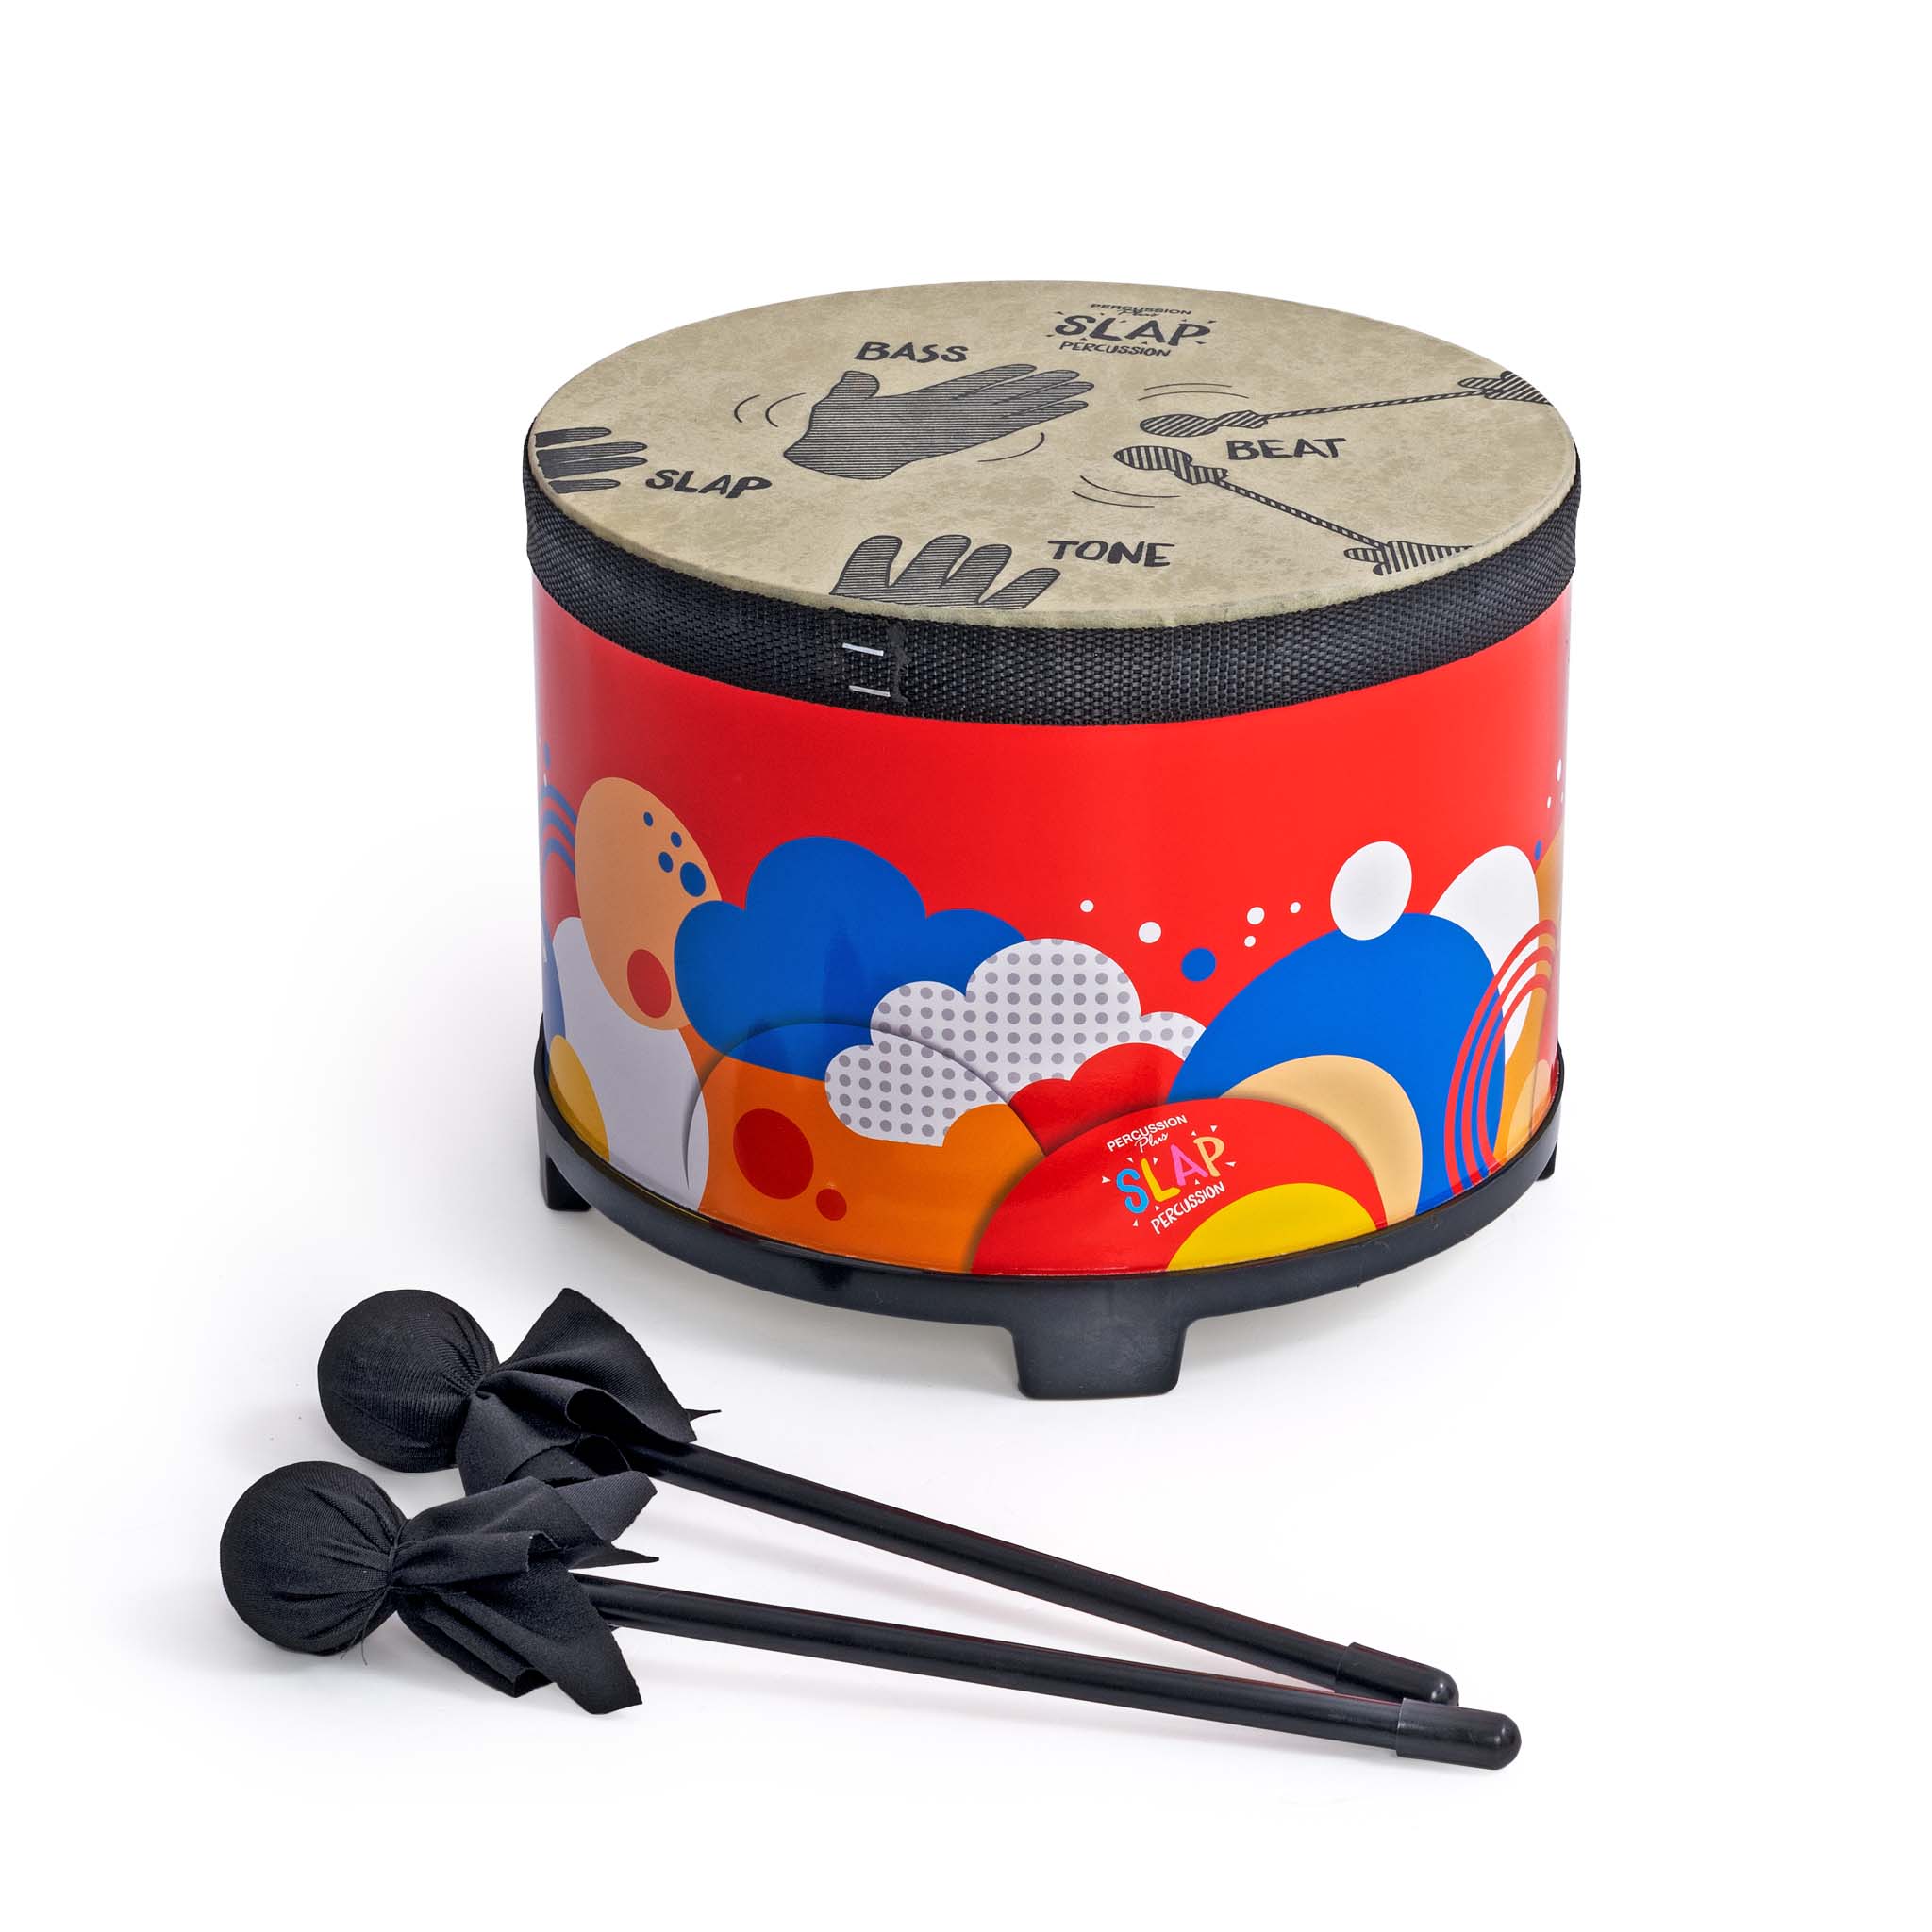 Slap Percussion - pack of 5 drums, The new Slap Drumming range from Percussion Plus is the perfect way to introduce rhythm and time into your music classes and sessions. Whether it's for a large primary school class, sessions at a local music centre or music therapy for any age, the Slap Drumming range gives you the tools you need for smooth running lessons at any ability level. Every drum from Percussion Plus produces a big, booming sound and is lots of fun for anyone aged 5+. All materials and hardware ha